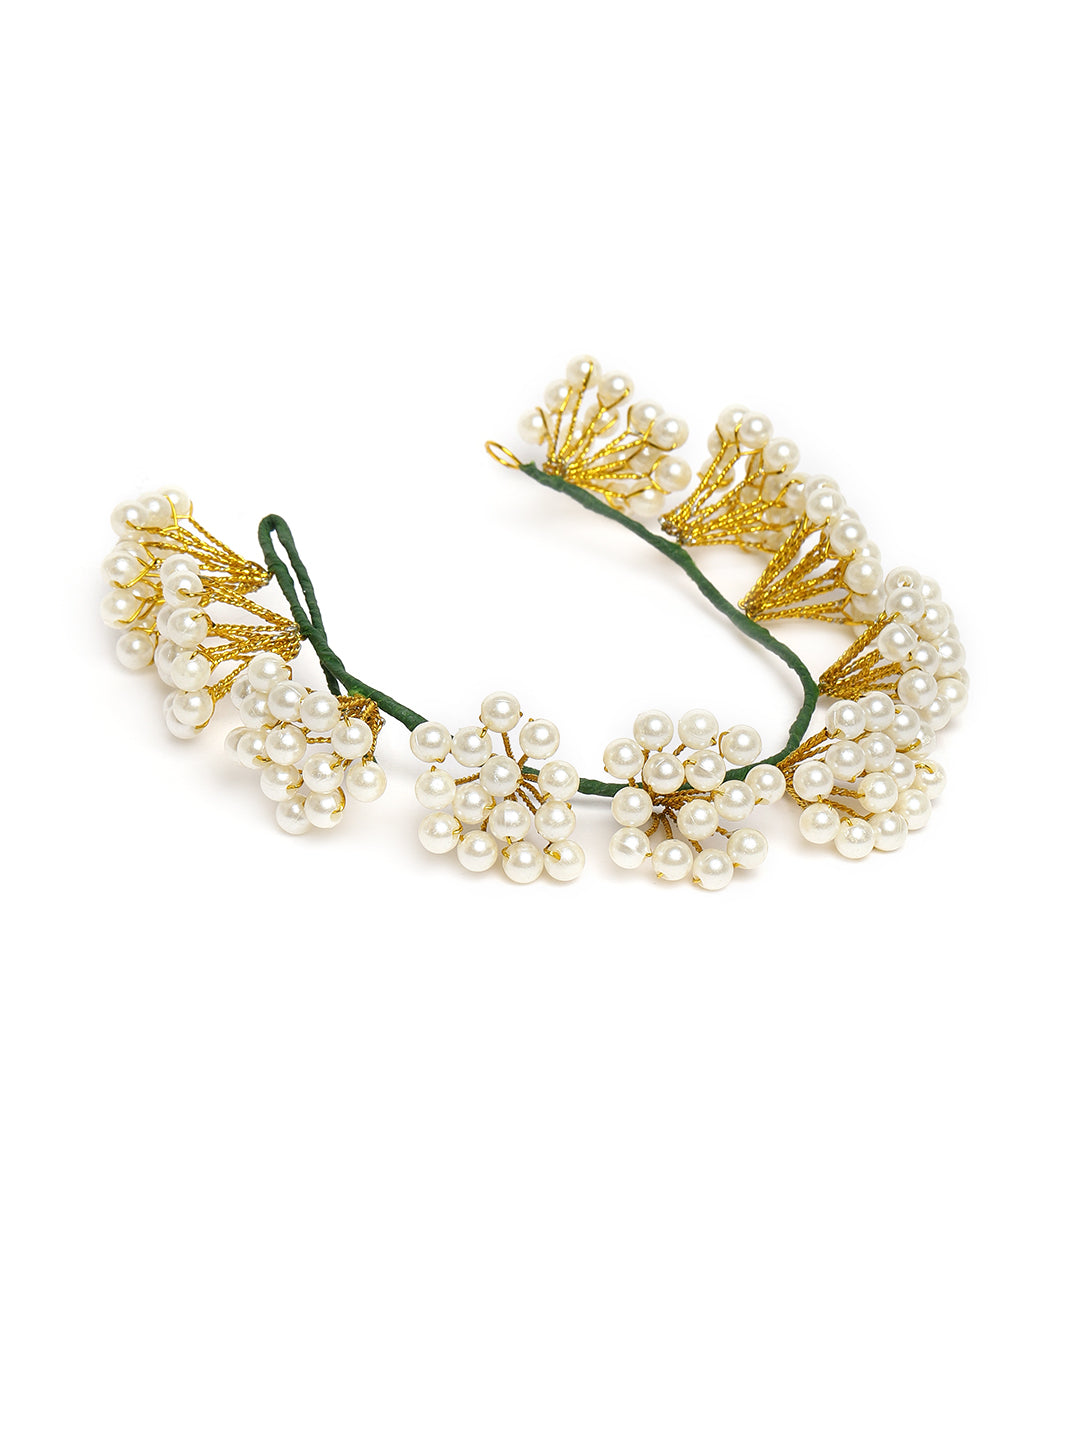 Laida White & Gold-Toned Handcrafted Embellished Bun Accessory